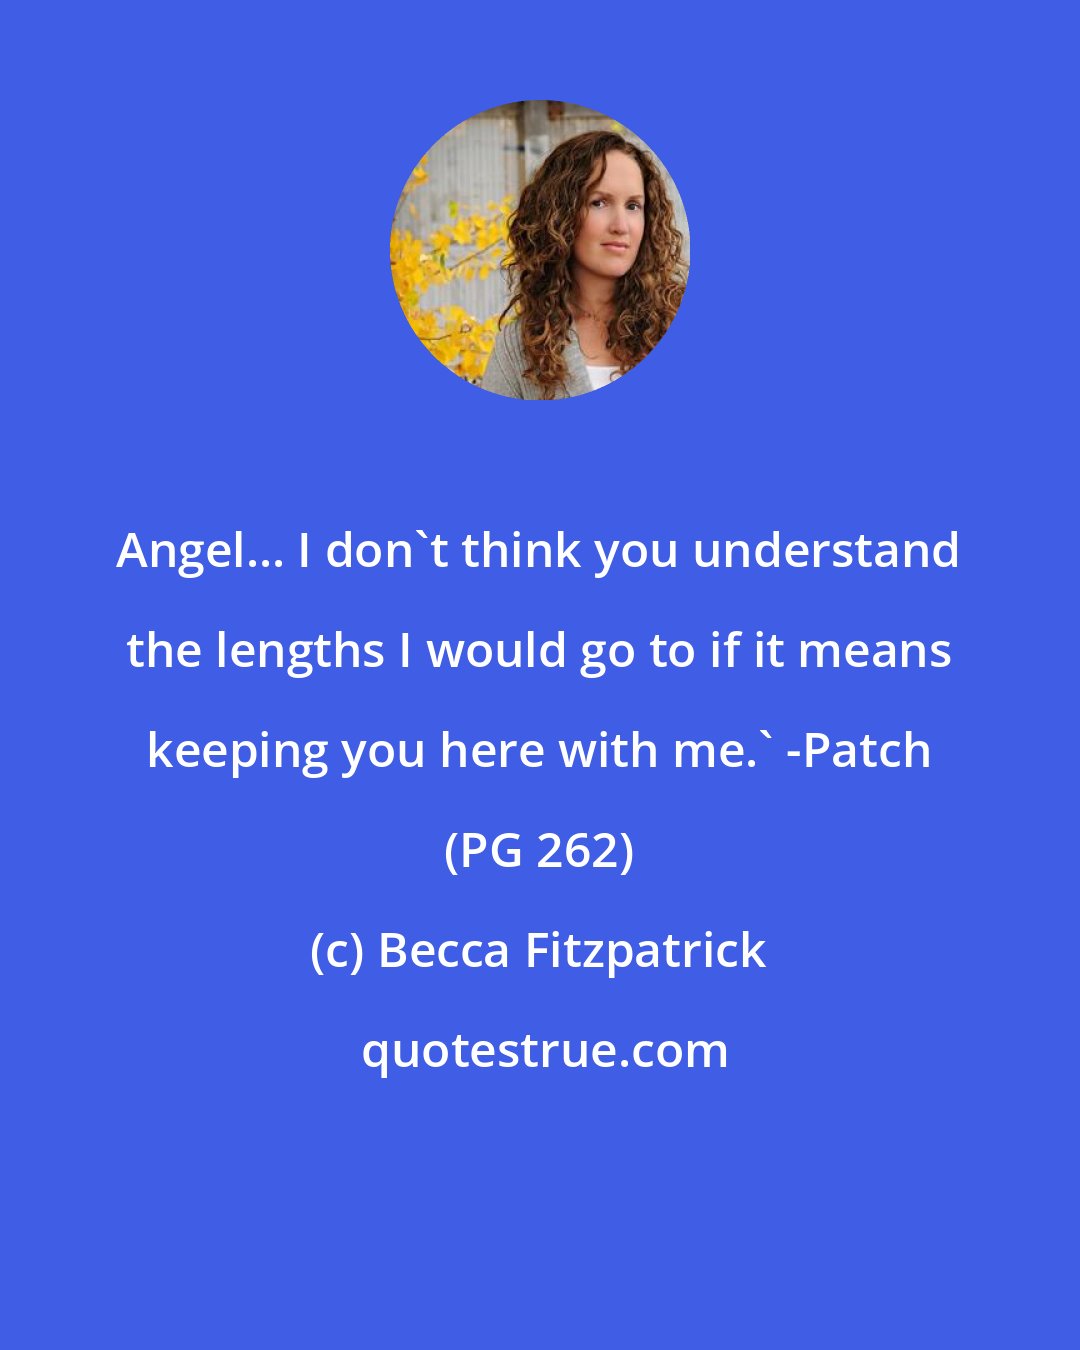 Becca Fitzpatrick: Angel... I don't think you understand the lengths I would go to if it means keeping you here with me.' -Patch (PG 262)